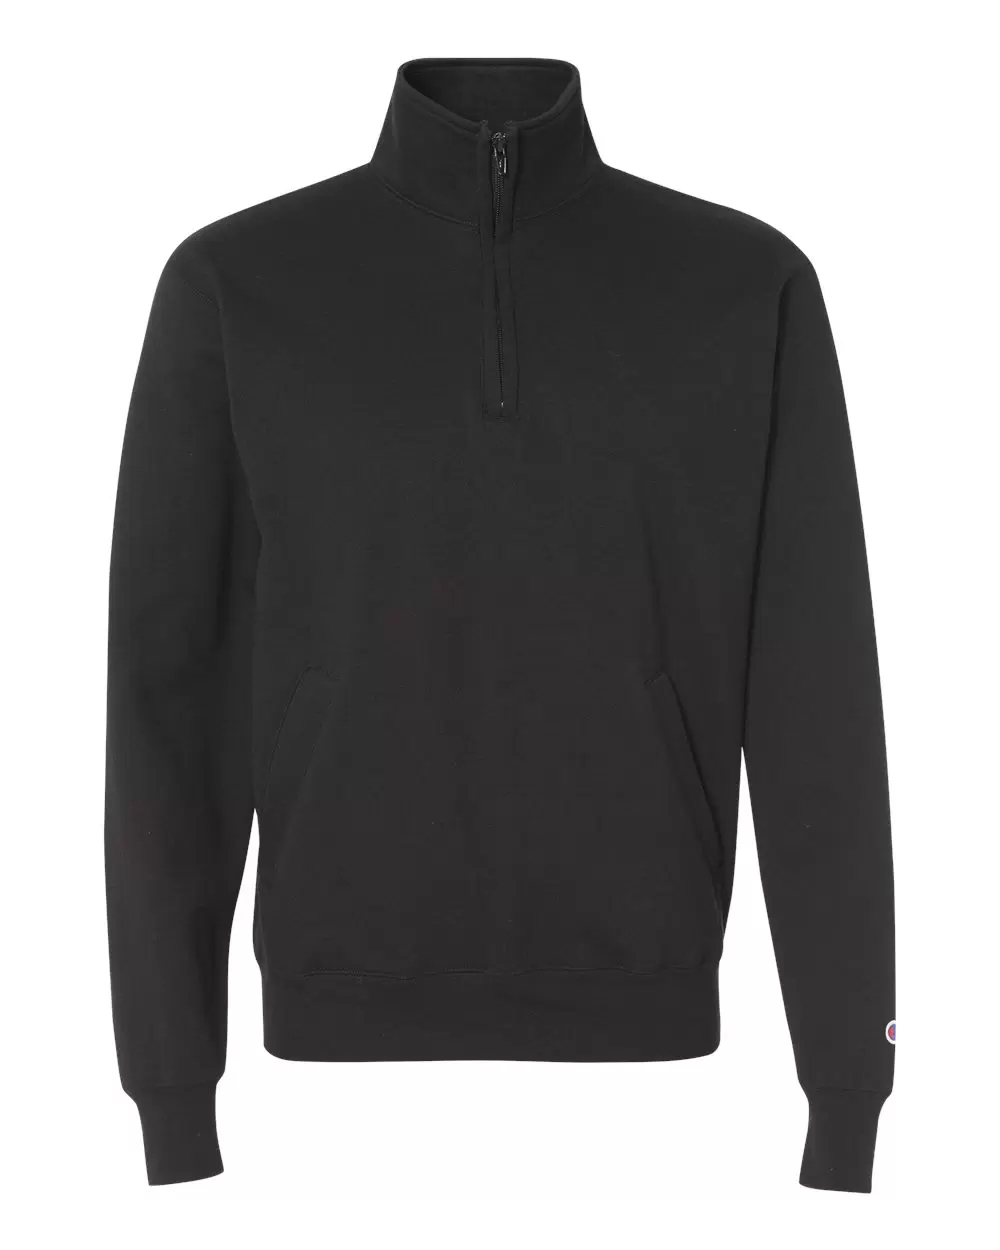 Champion S400 Double Dry Eco 1/4 Zip Pullover - From $20.14